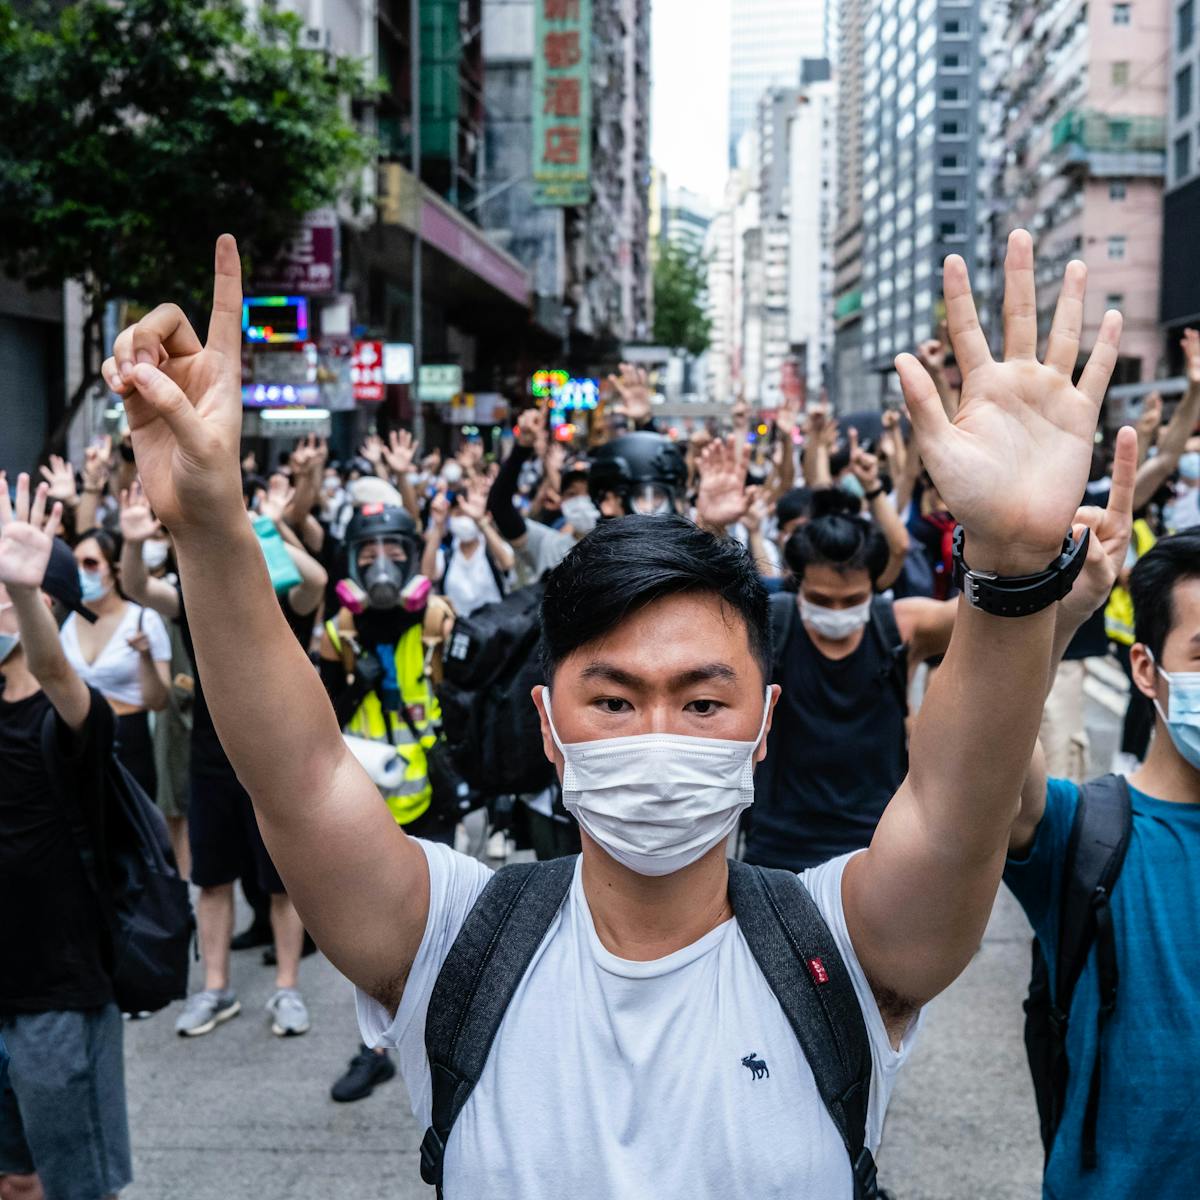 Hong Kong activists now face a choice: stay silent, or flee the city. The world must give them a path to safety